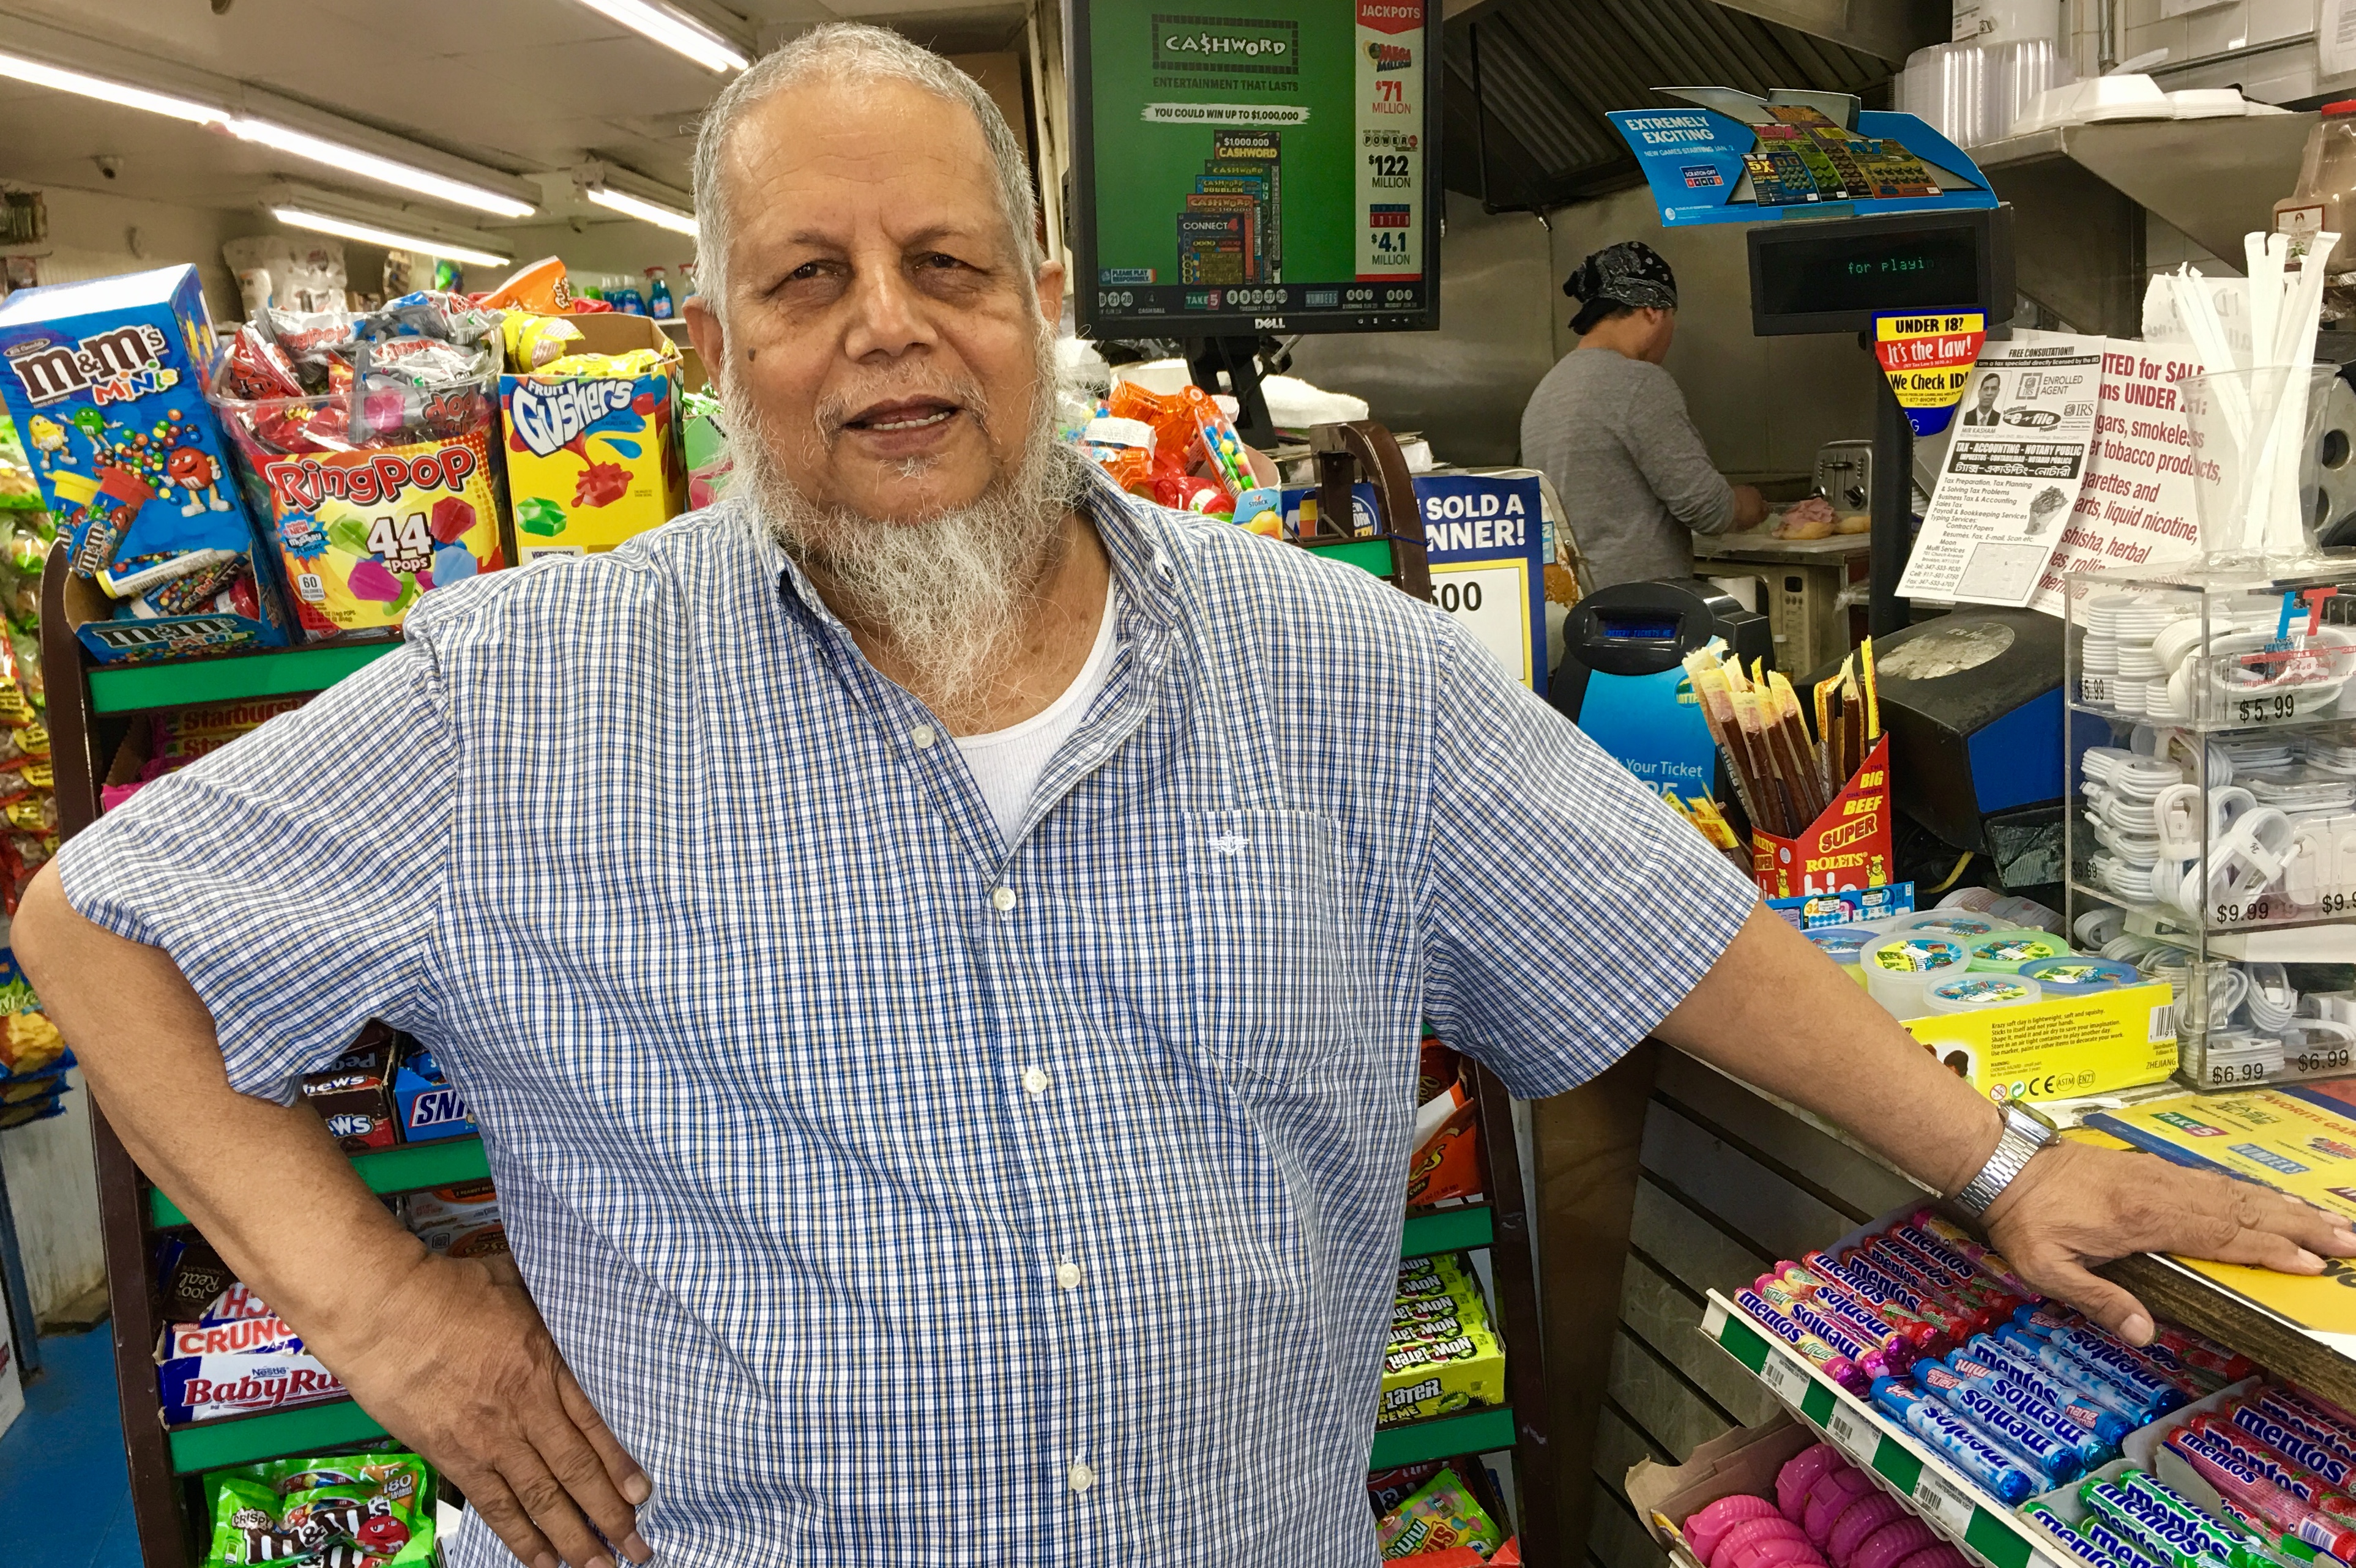 Here’s Kensington resident Abdul Miah at Moon Deli and Grocery on Church Avenue. Eagle photo by Lore Croghan